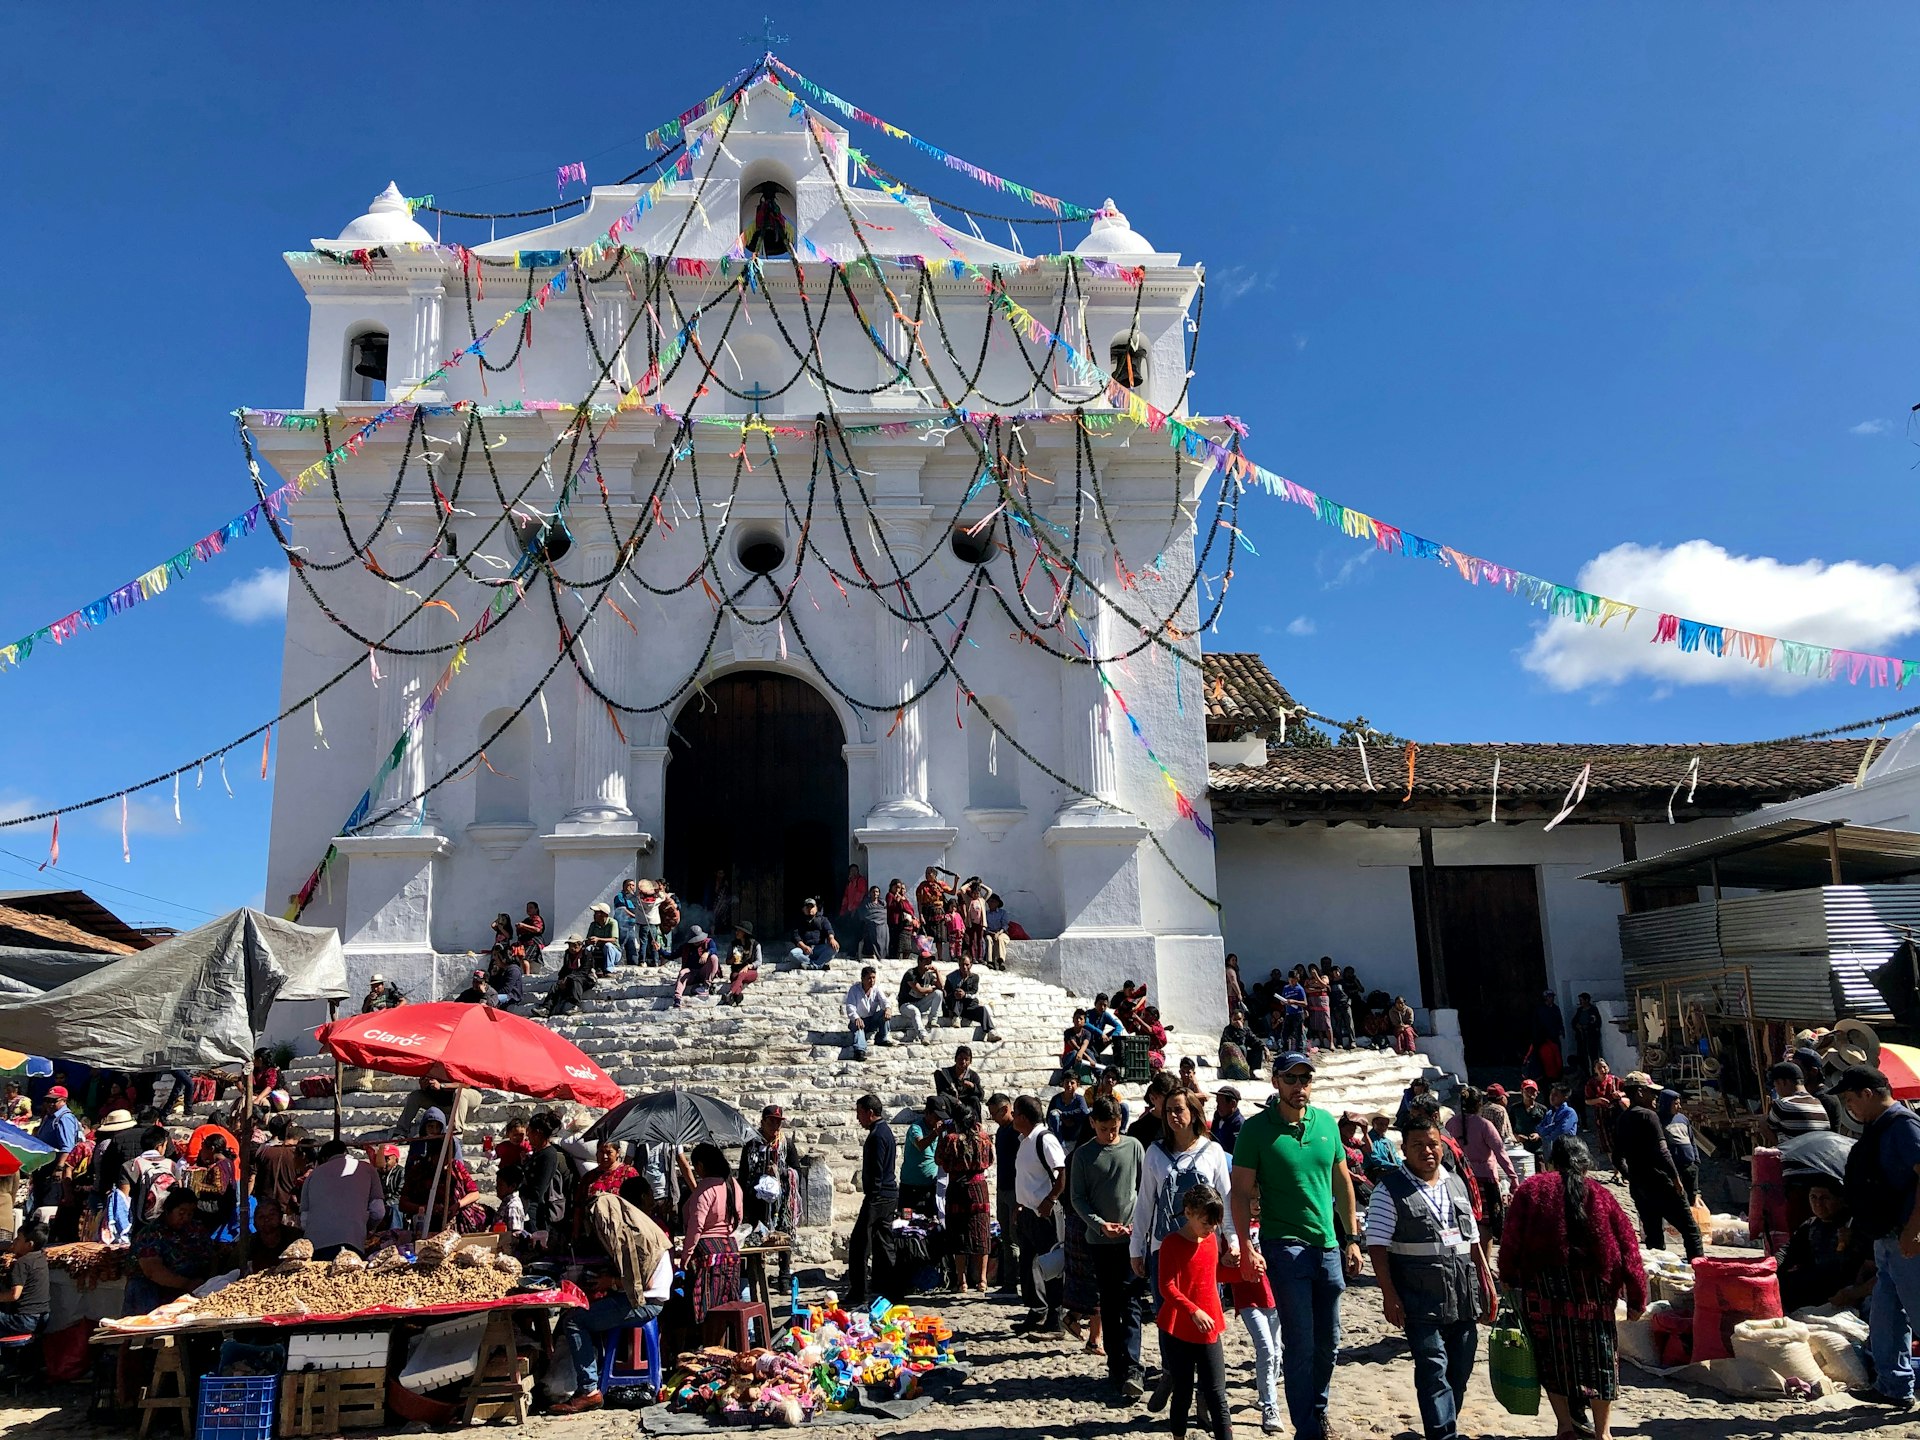 People crowd around the church of  Chichicastenango during the feast day of Santo Tomás